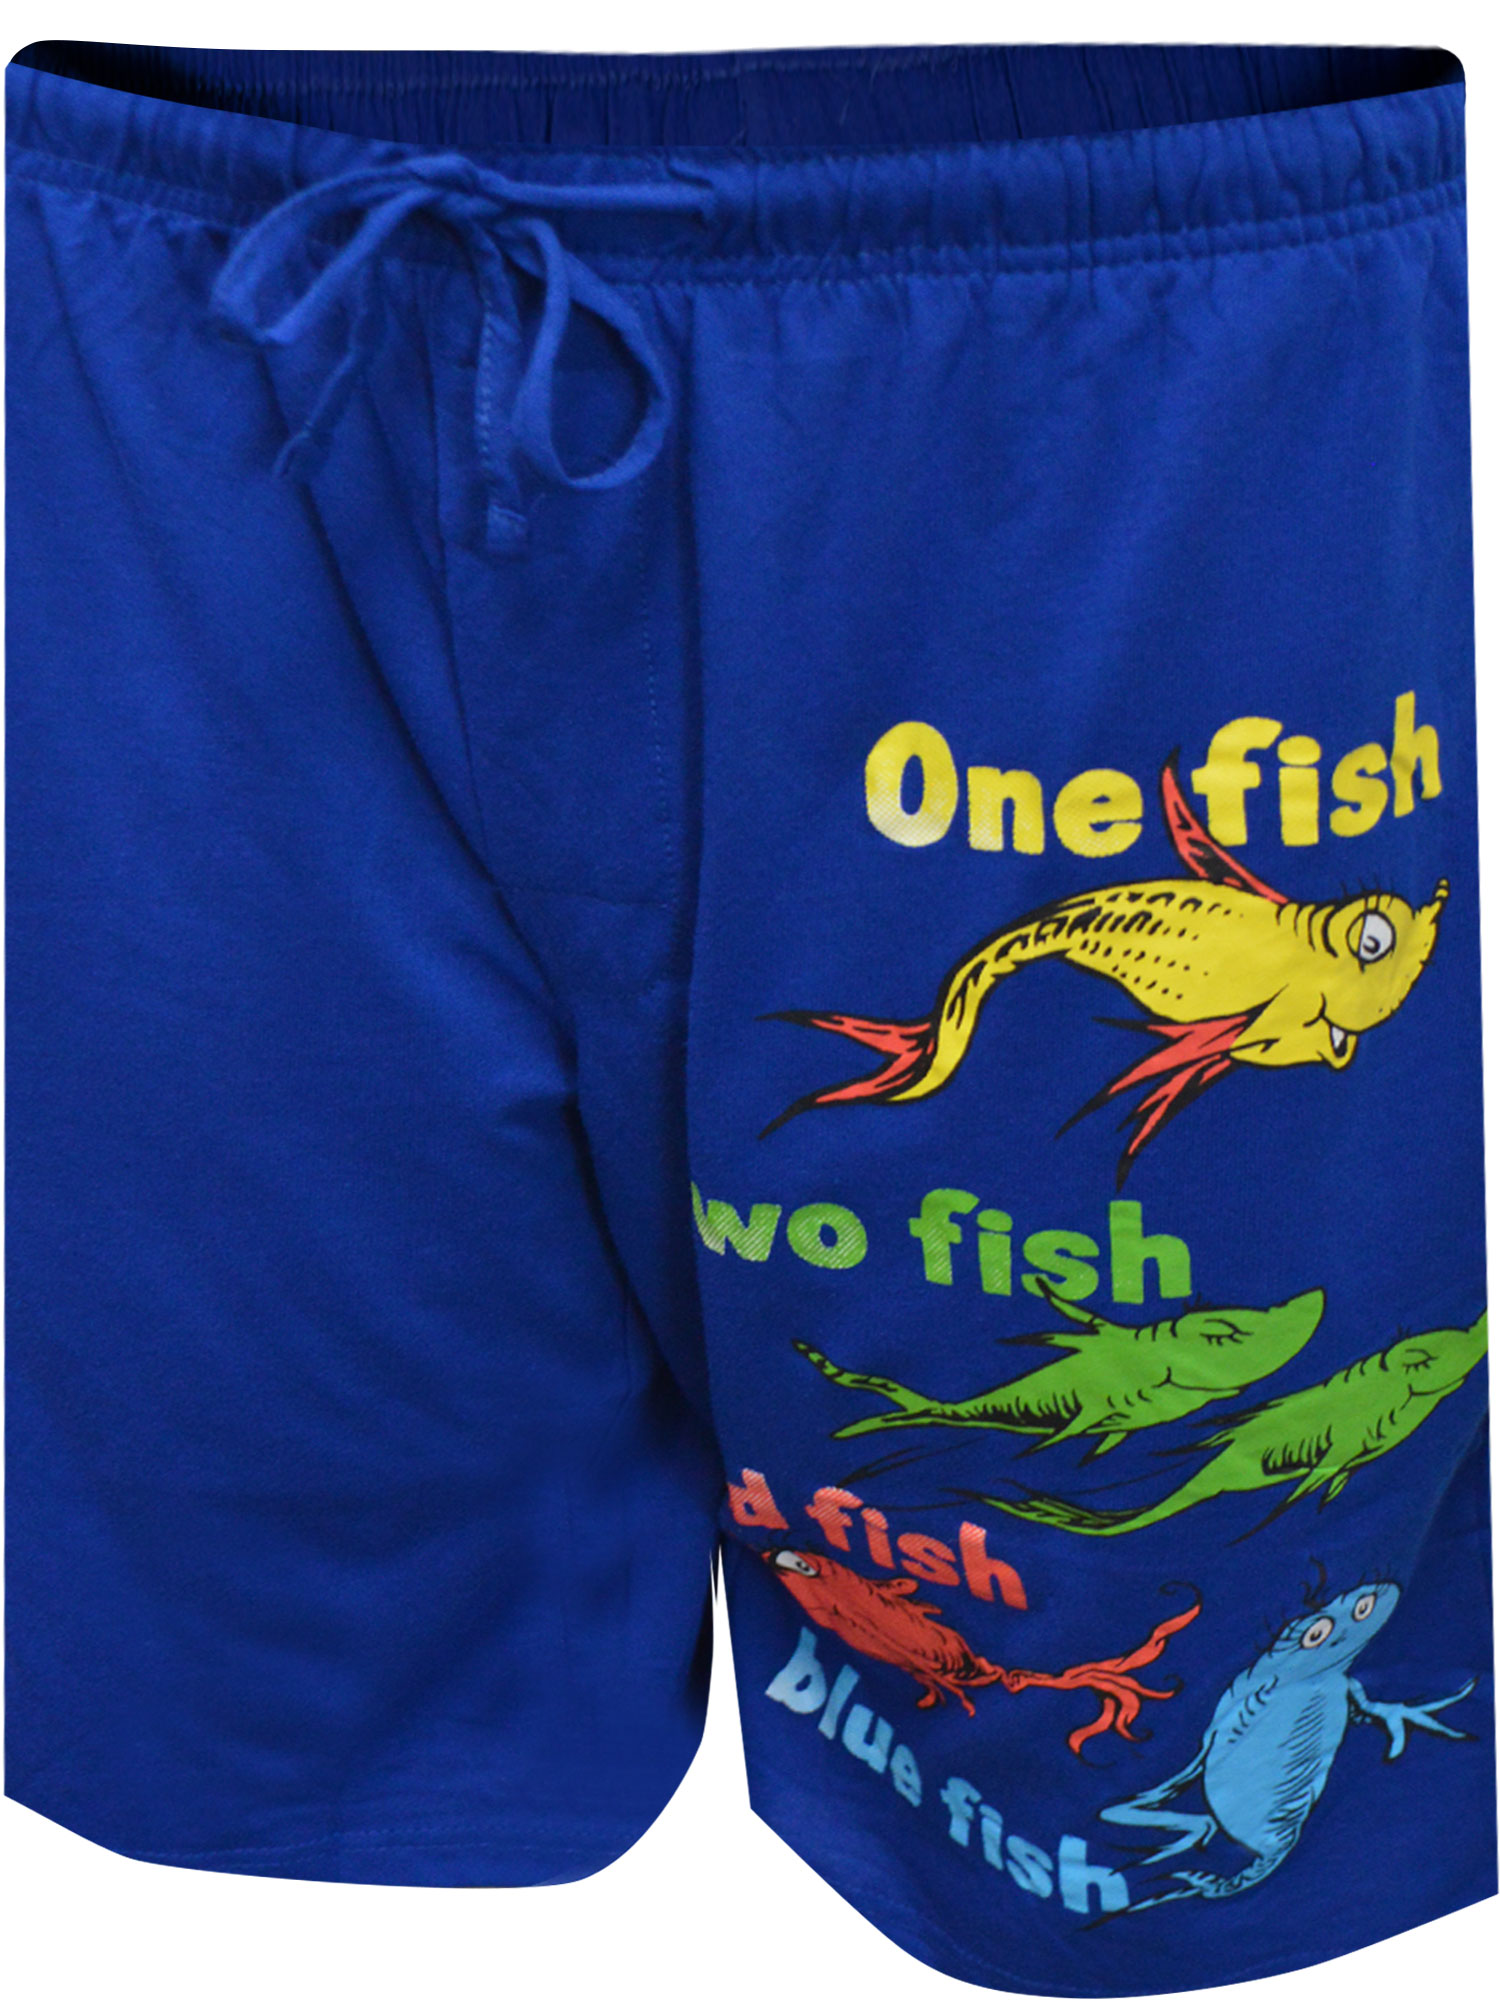 MJC Mens Dr Seuss One Fish Two Fish Blue Lounge Shorts (Small) - image 2 of 3